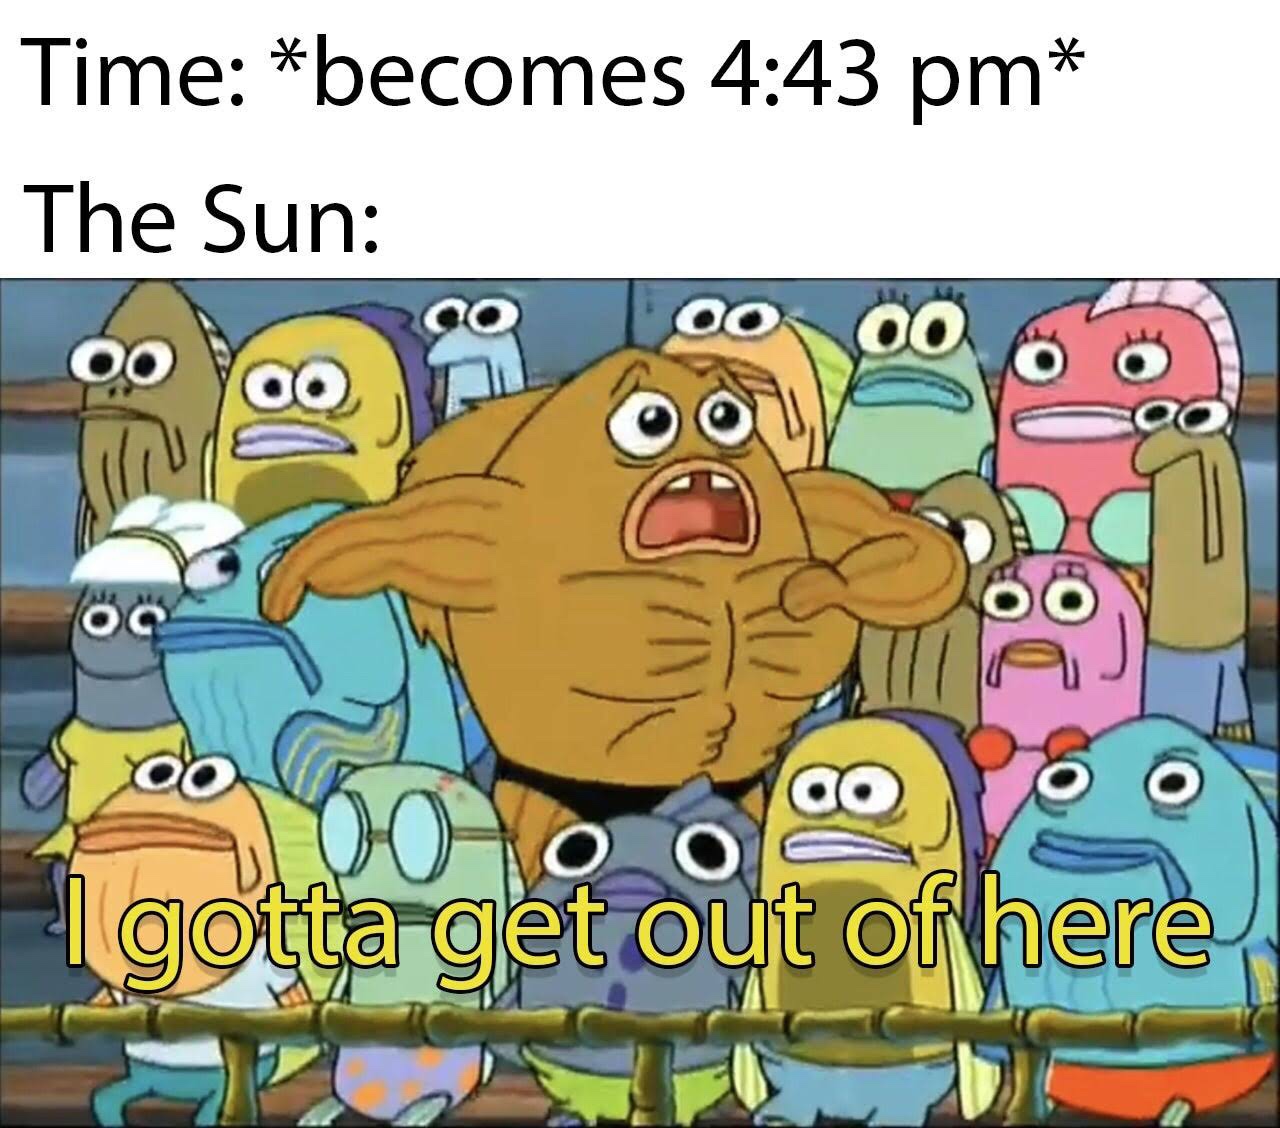 gotta get outta here meme - Time becomes The Sun co I gotta get out of here